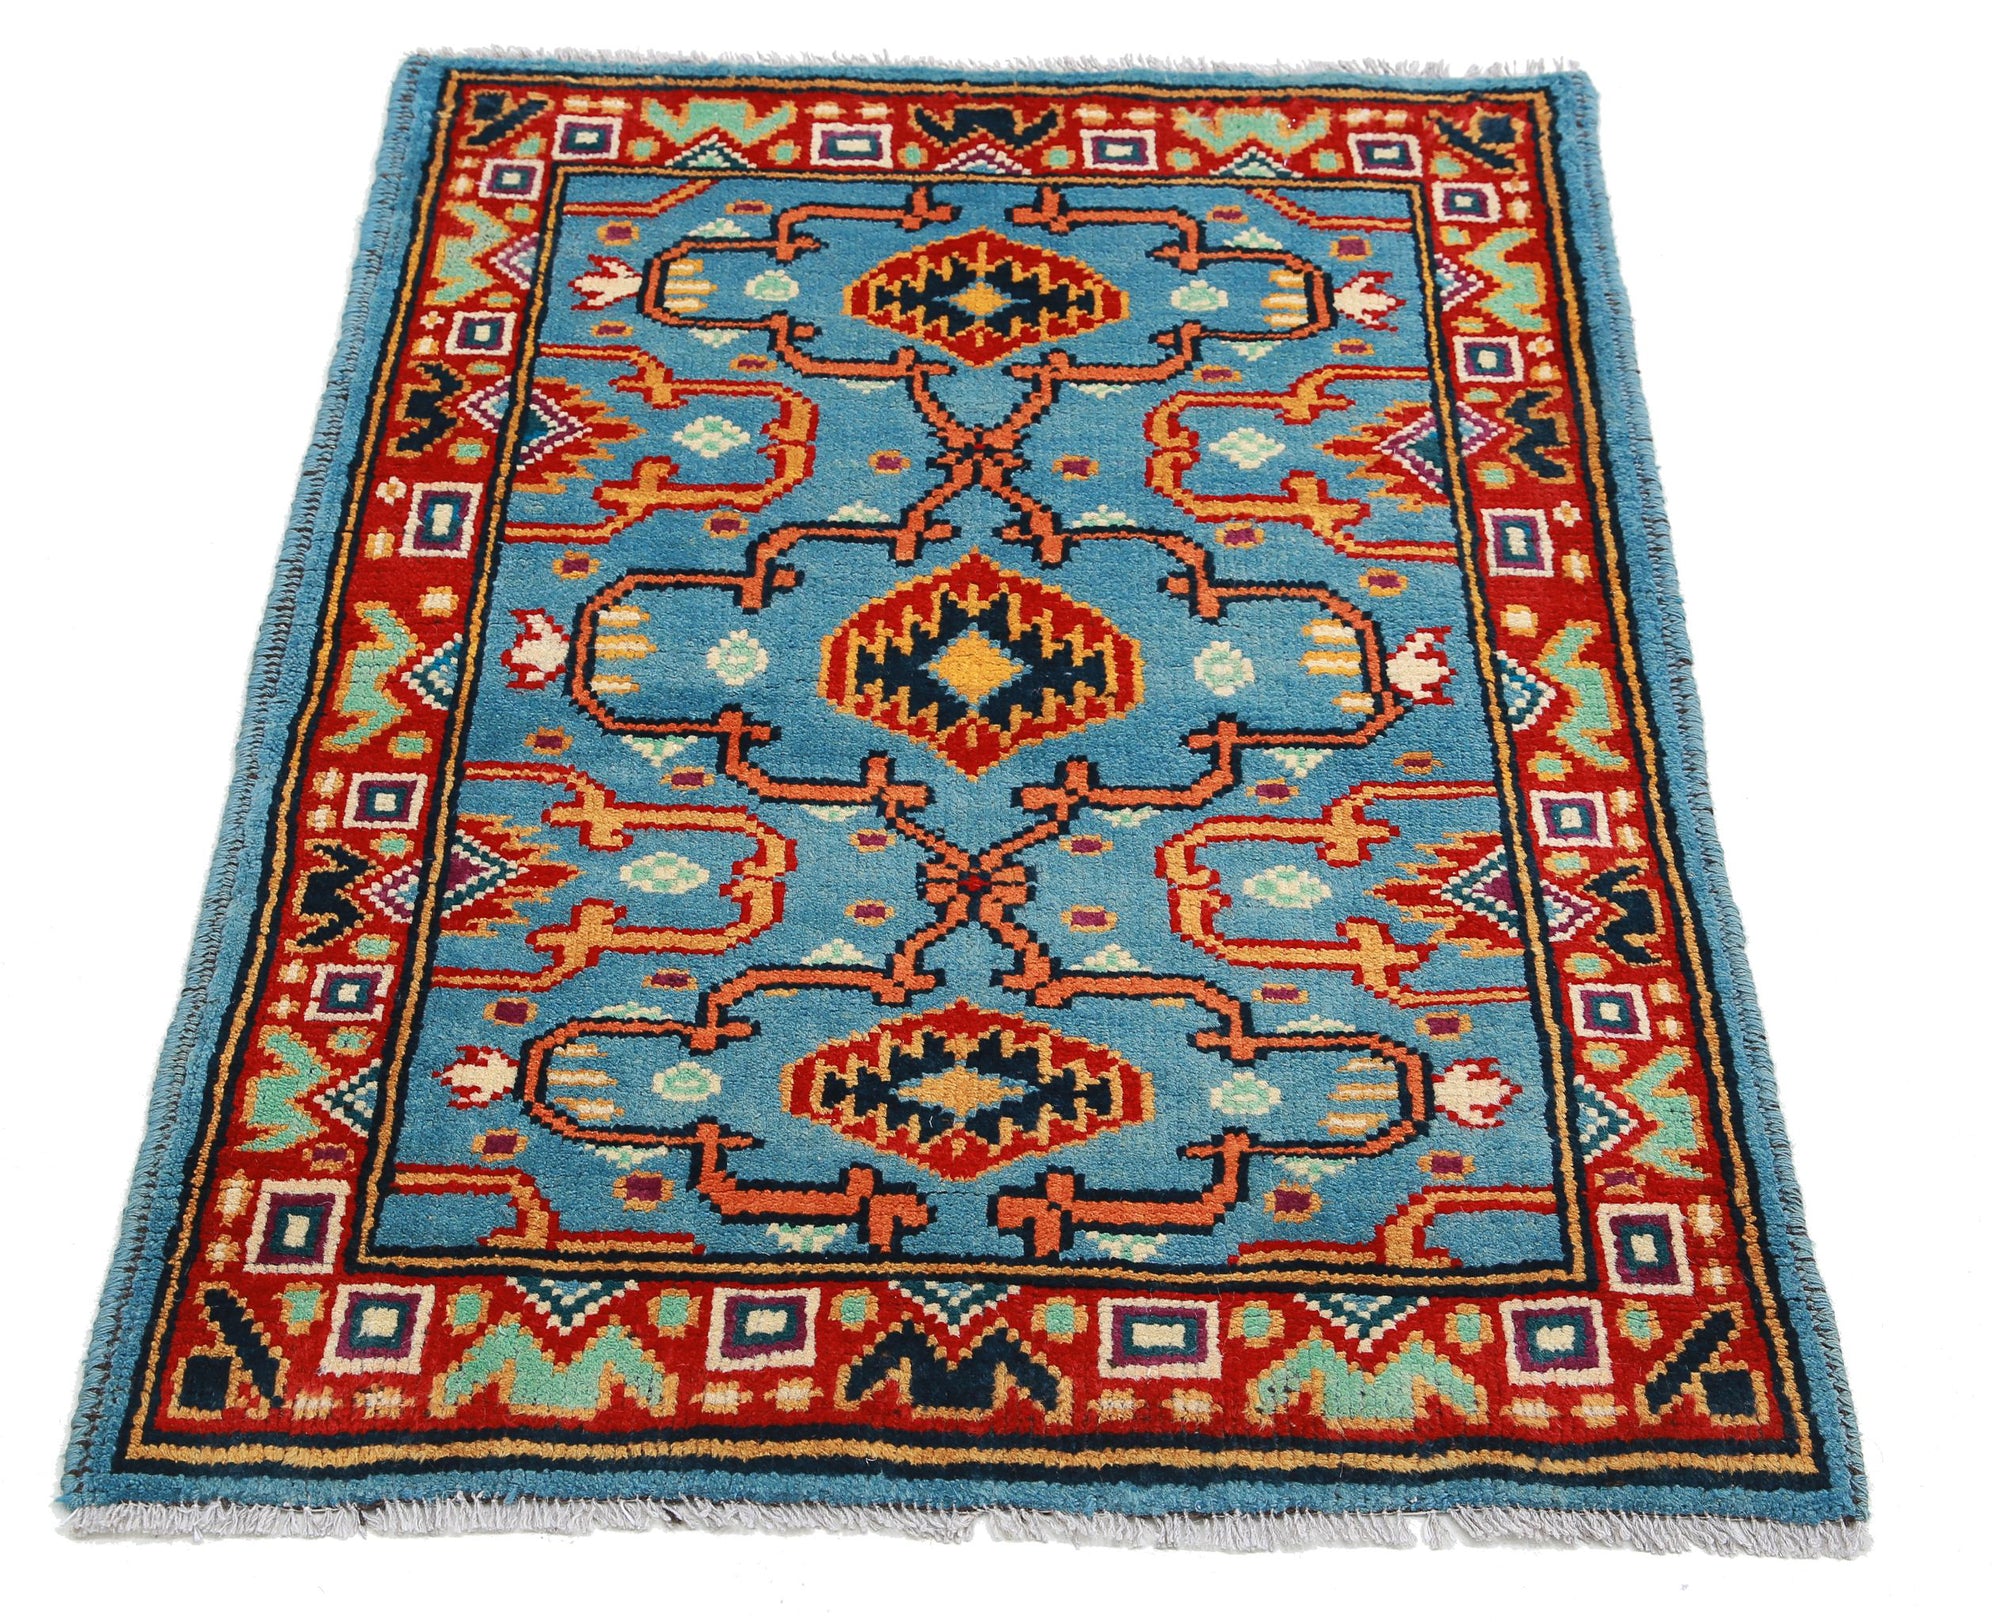 Revival-hand-knotted-qarghani-wool-rug-5014190-3.jpg